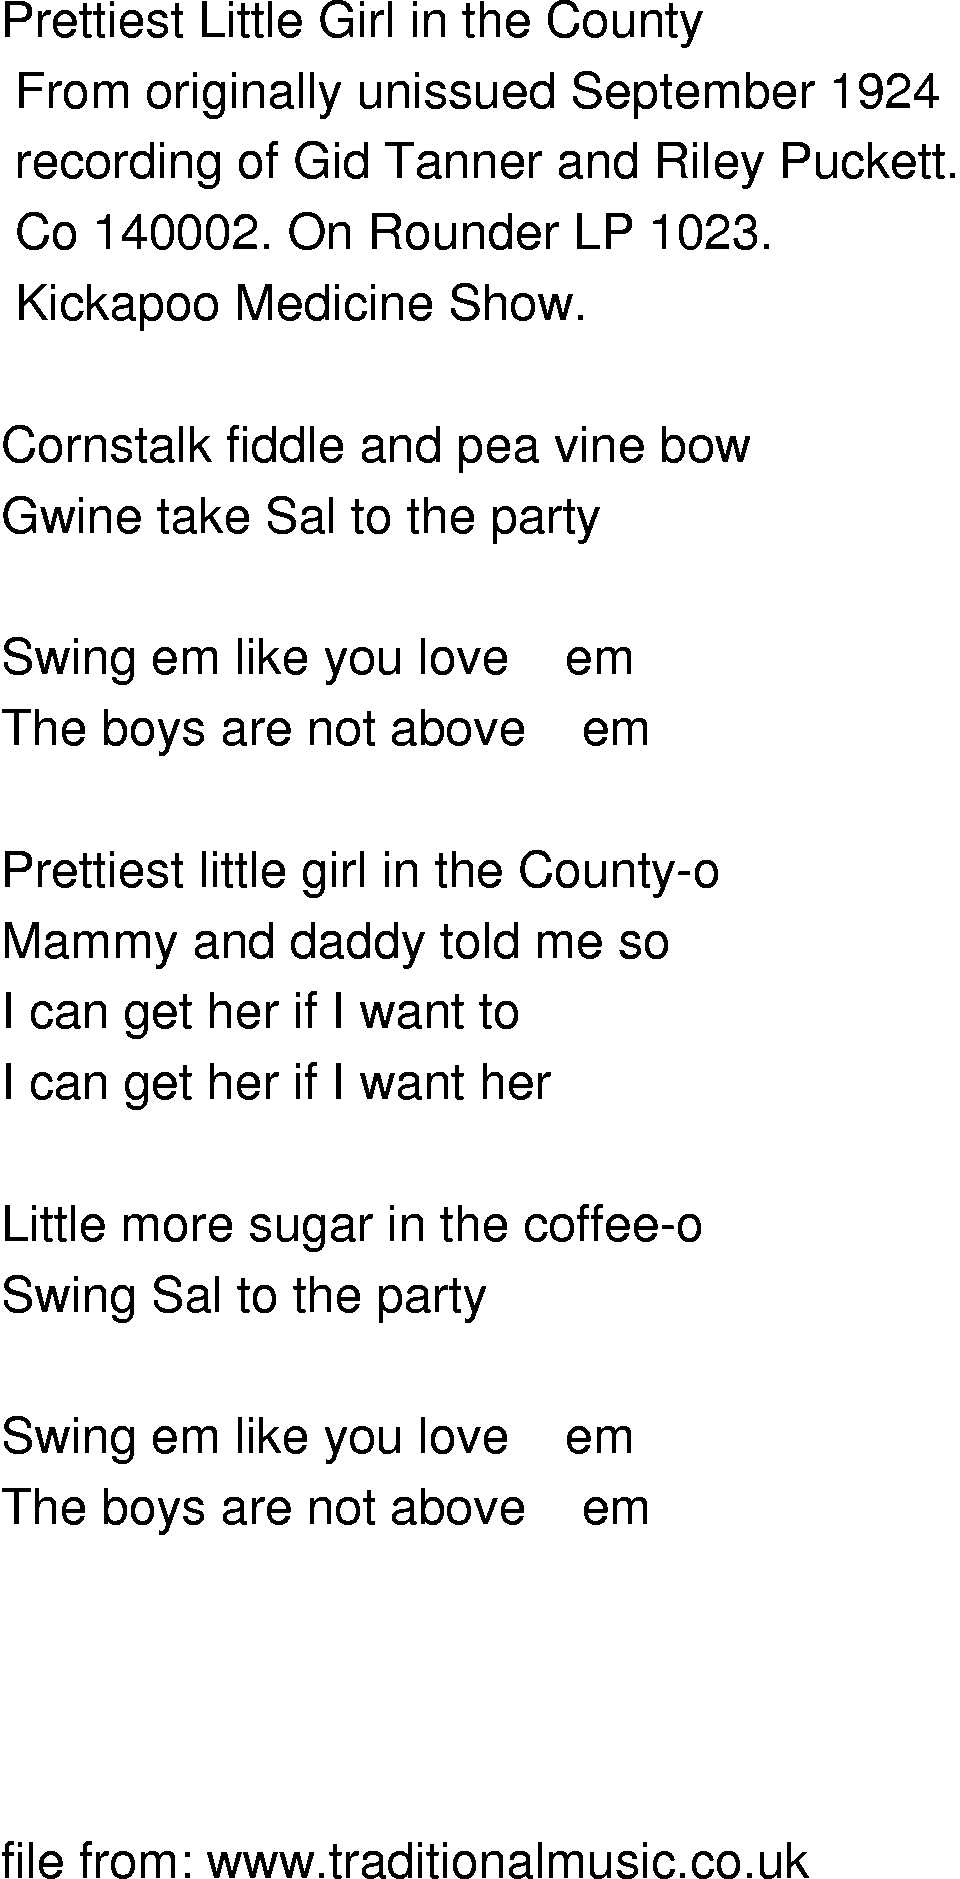 Old-Time (oldtimey) Song Lyrics - prettiest little girl in the county